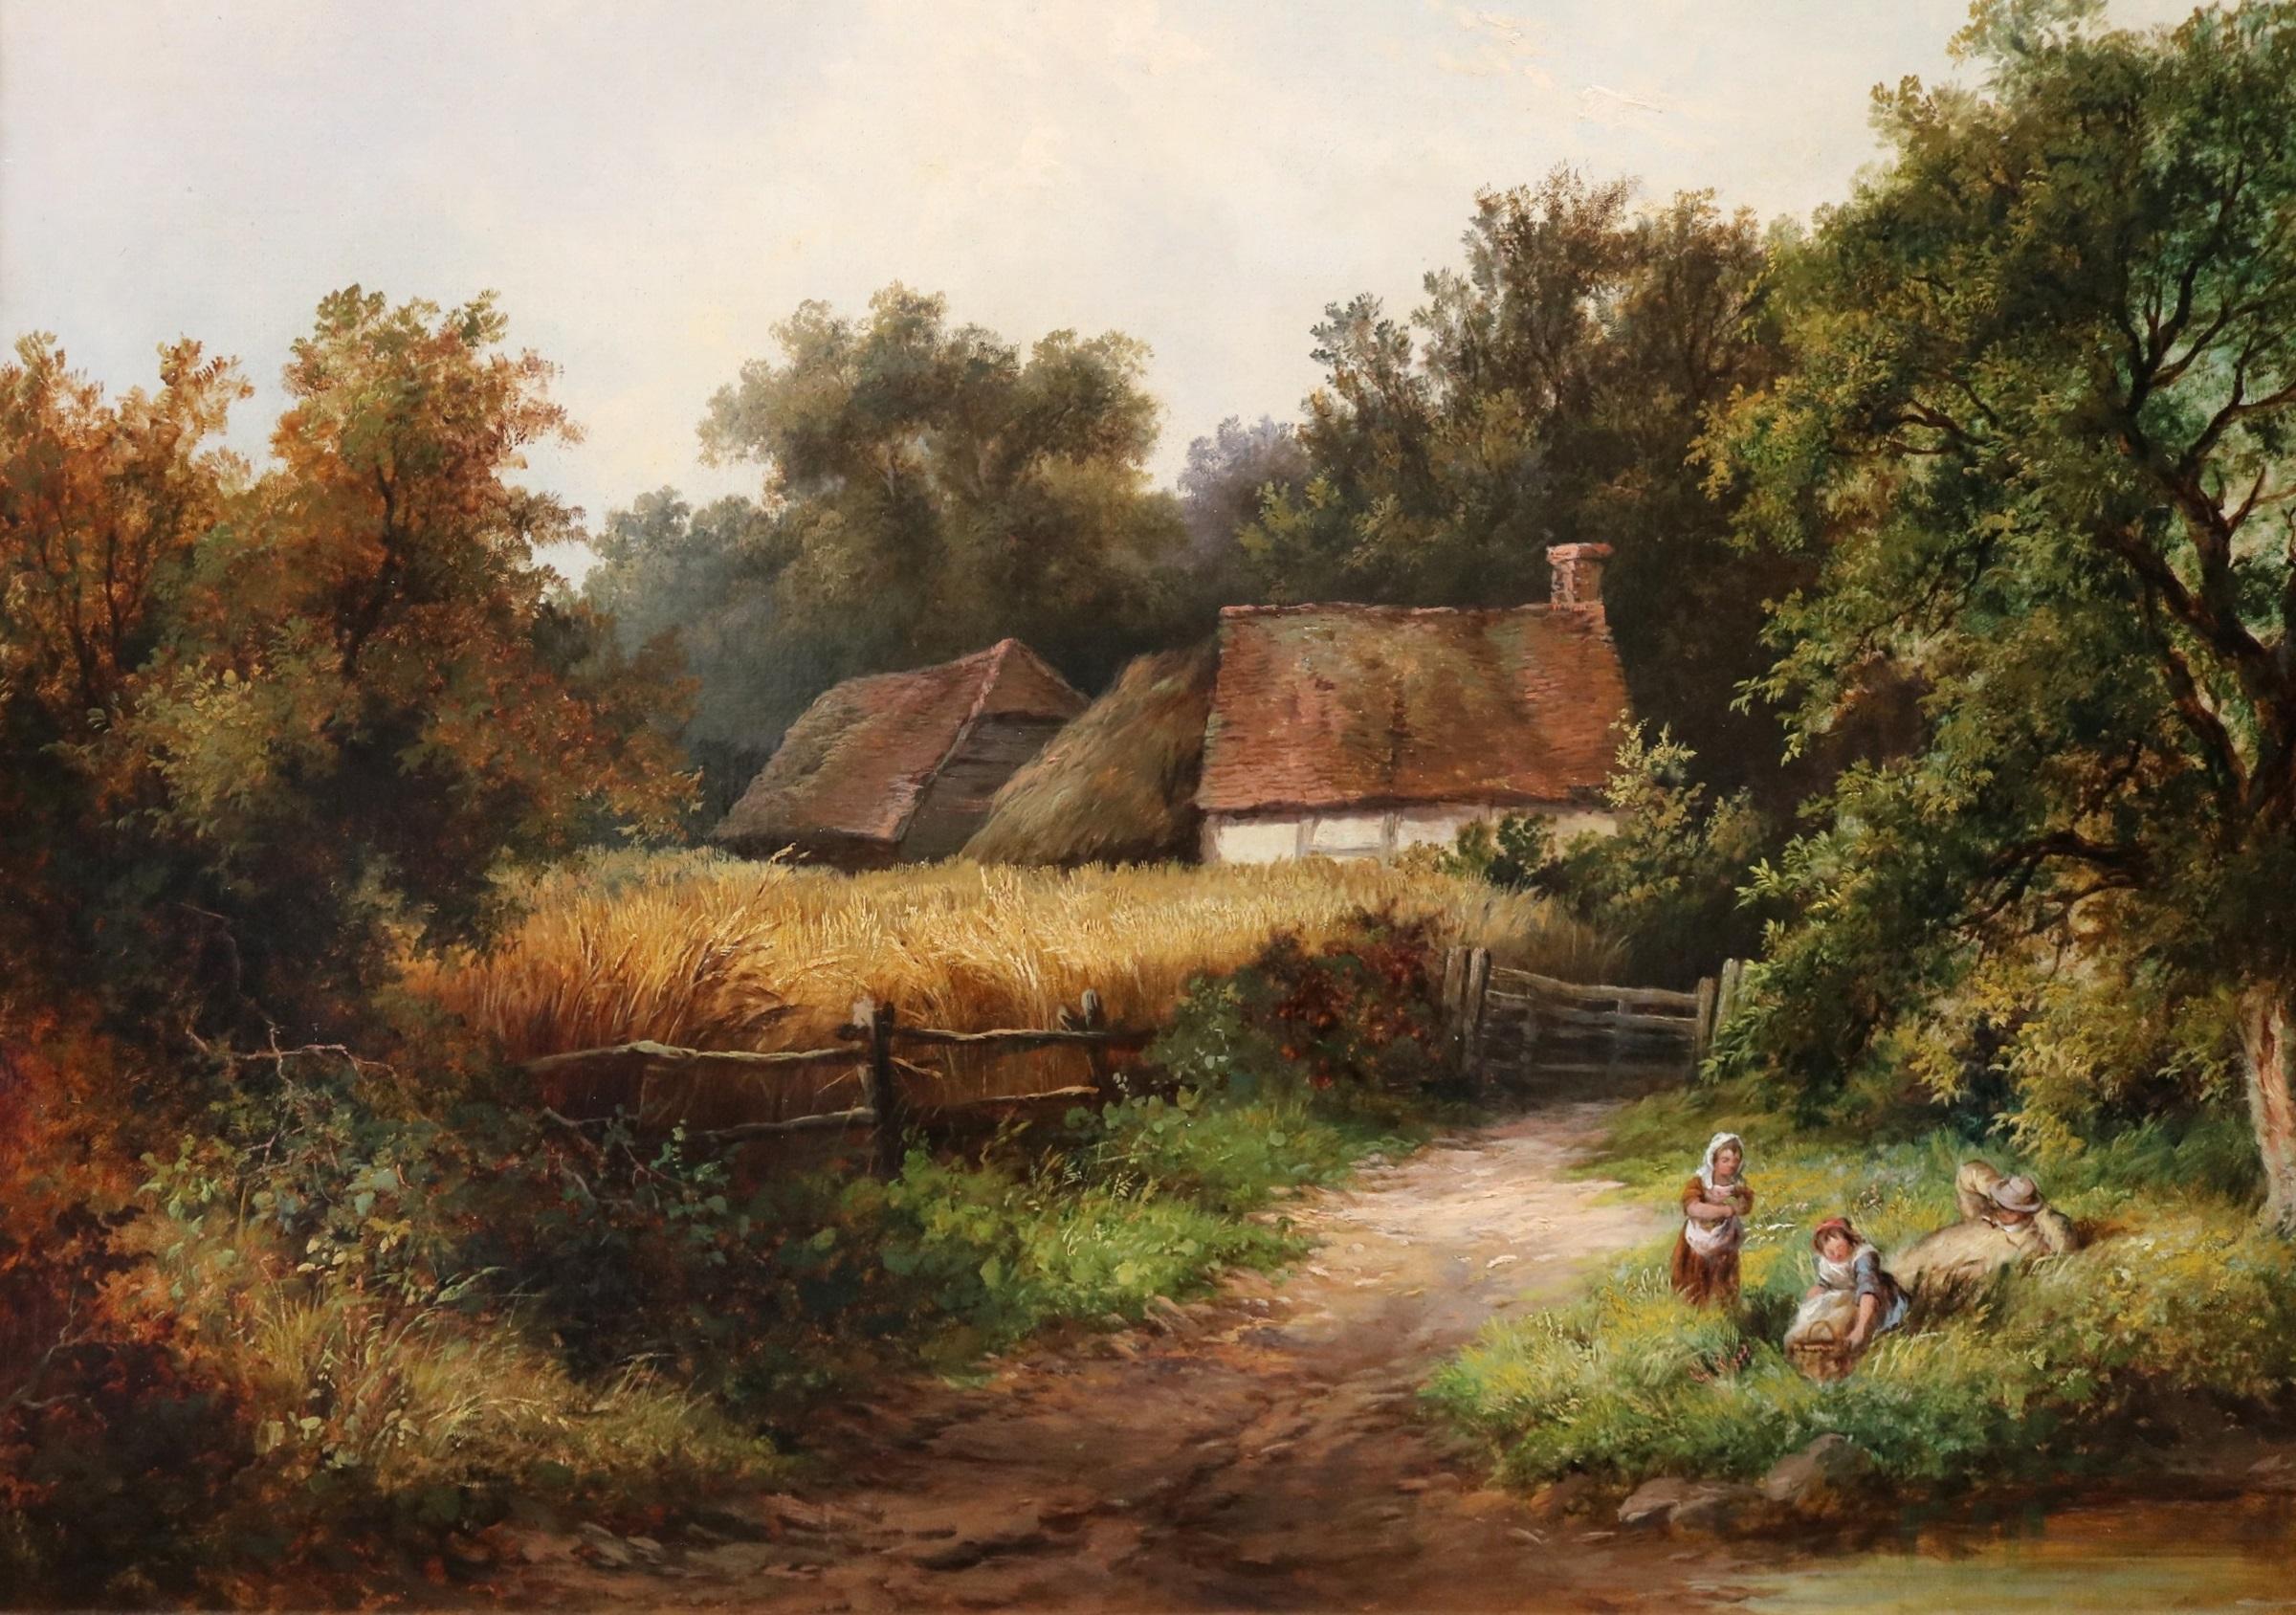 A Kentish Homestead - Large 19th Century English Country Landscape Oil Painting  1